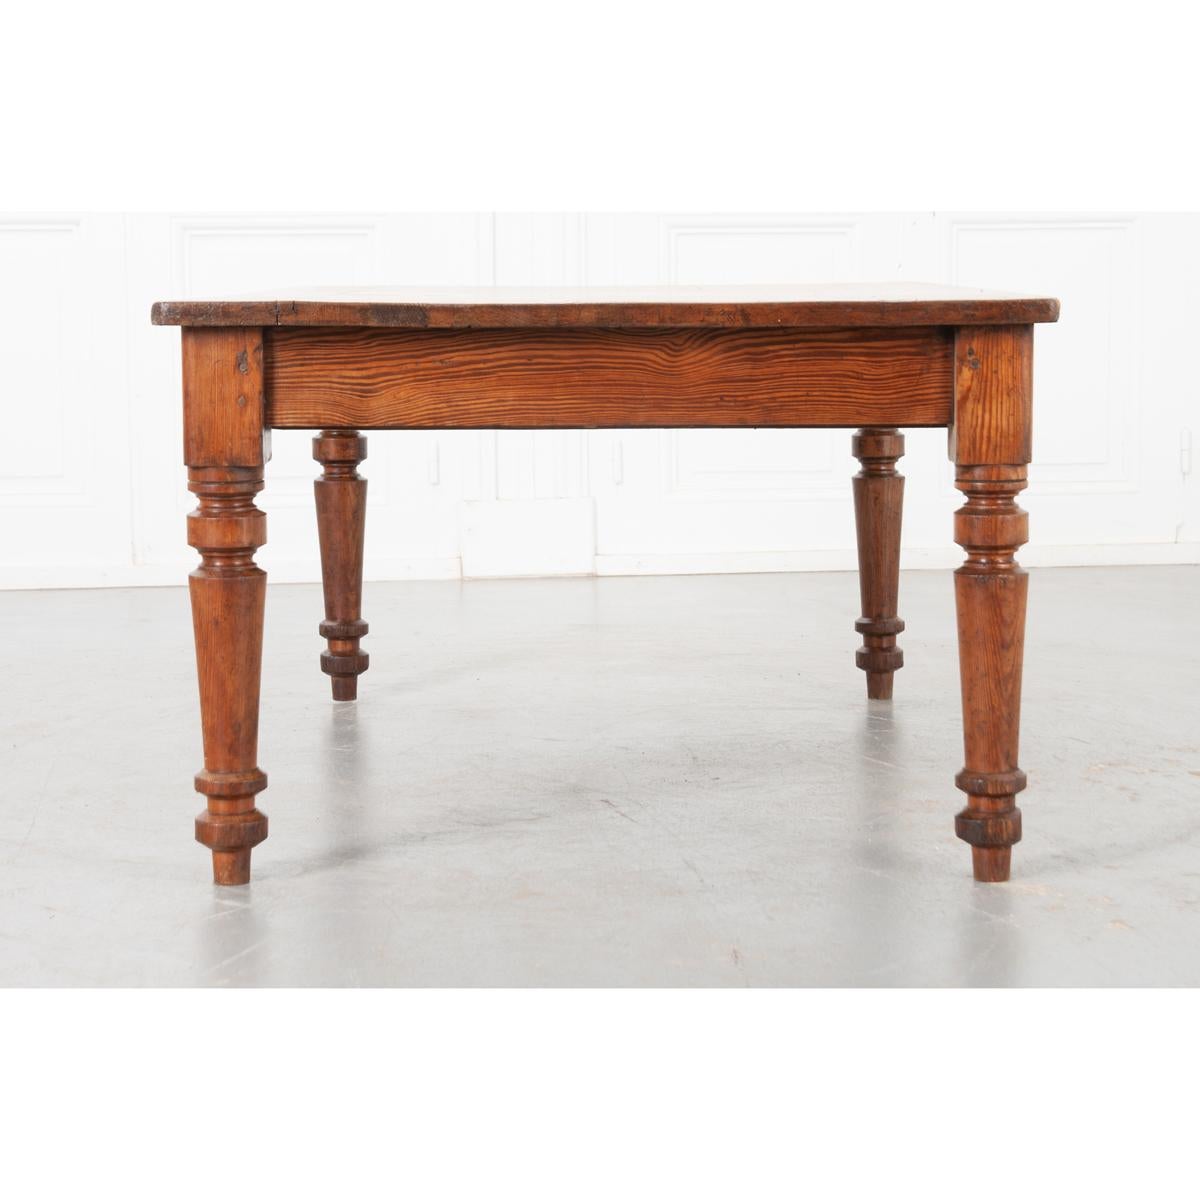 This fine coffee table from the 1800’s is made from pitch pine, the stronger and generally thicker cousin of pine. Its dark and resinous grain lines contrast the bright honey color of the wood for a striking combination. The top, smoothed with